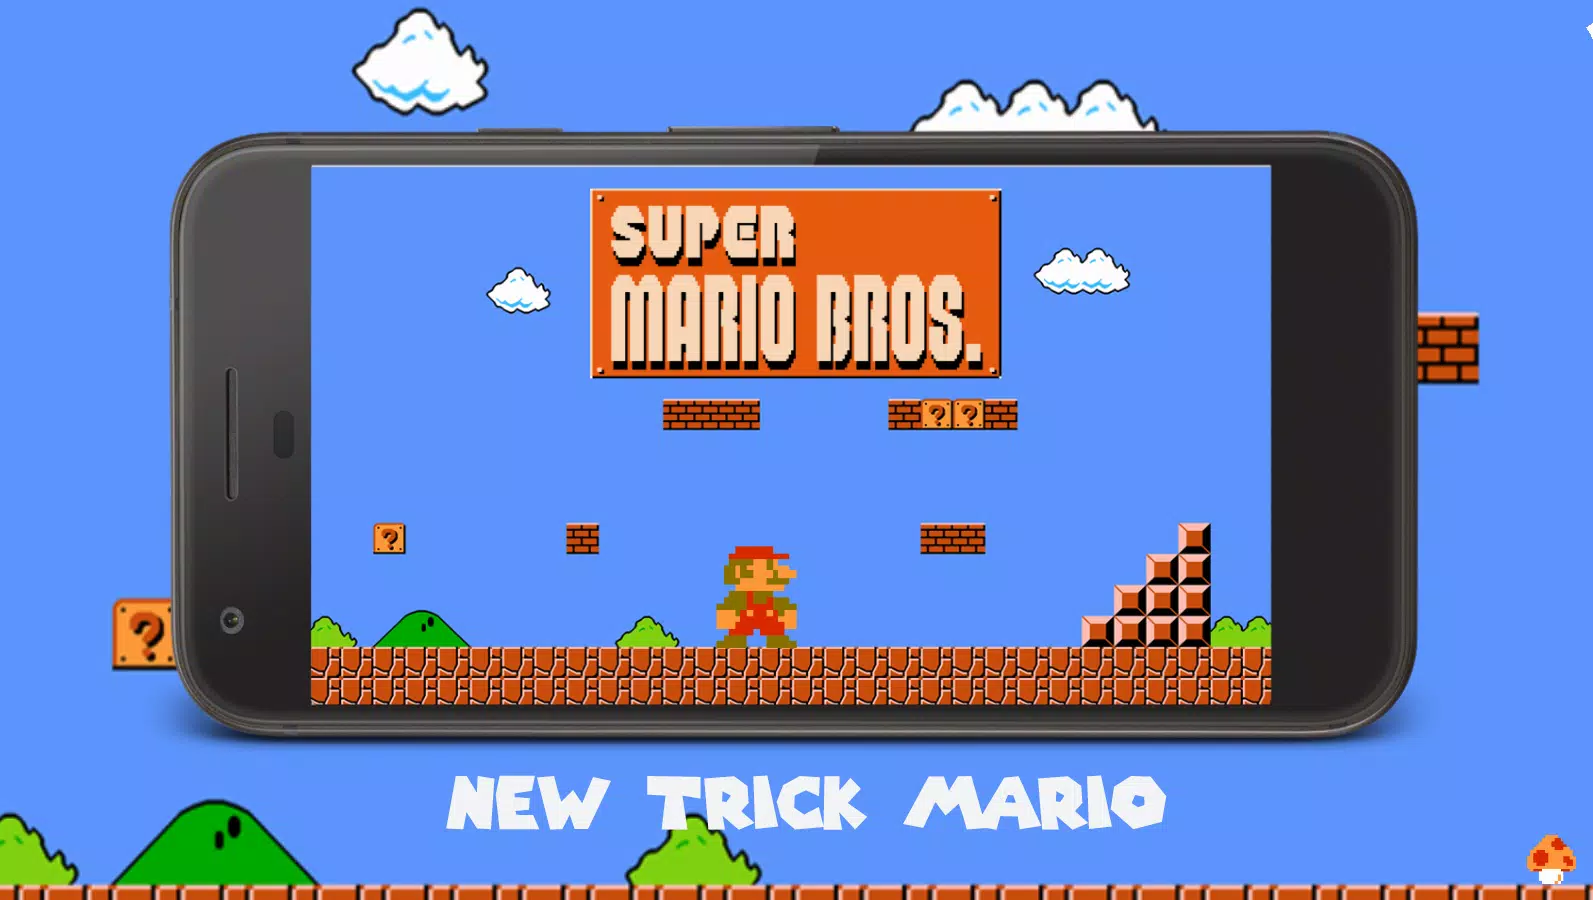 Don't Download the 'Super Mario Run' Knockoffs on Android